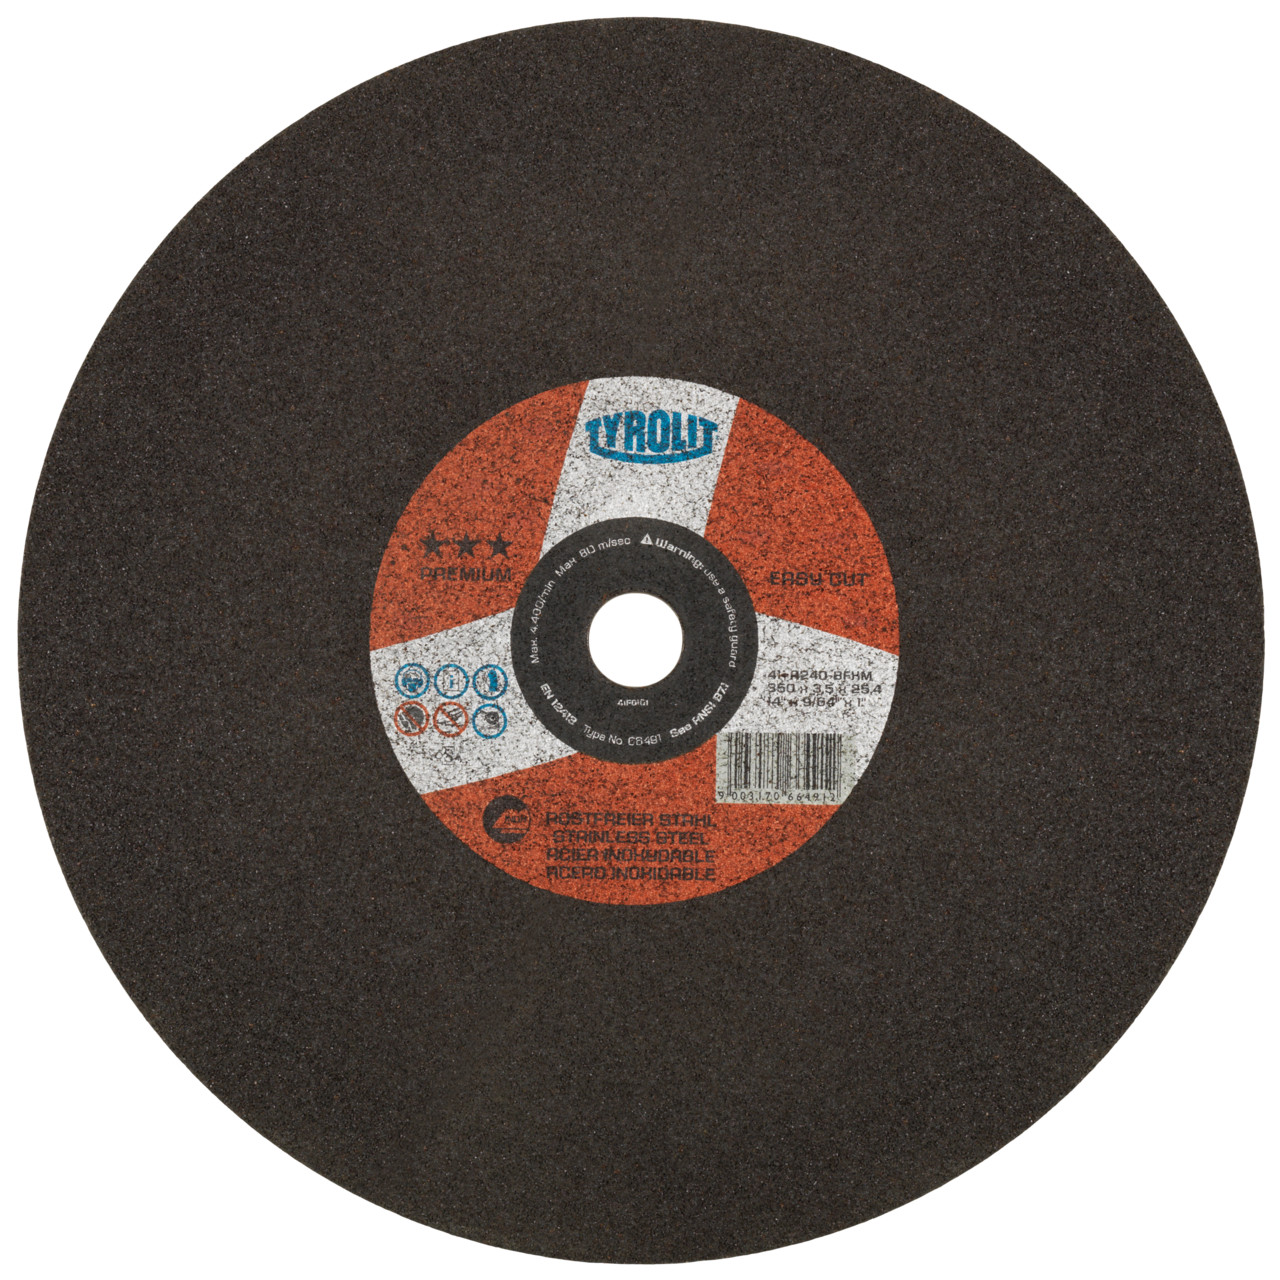 Tyrolit Cutting discs DxDxH 500x5x40 For stainless steel, shape: 41 - straight version, Art. 460744